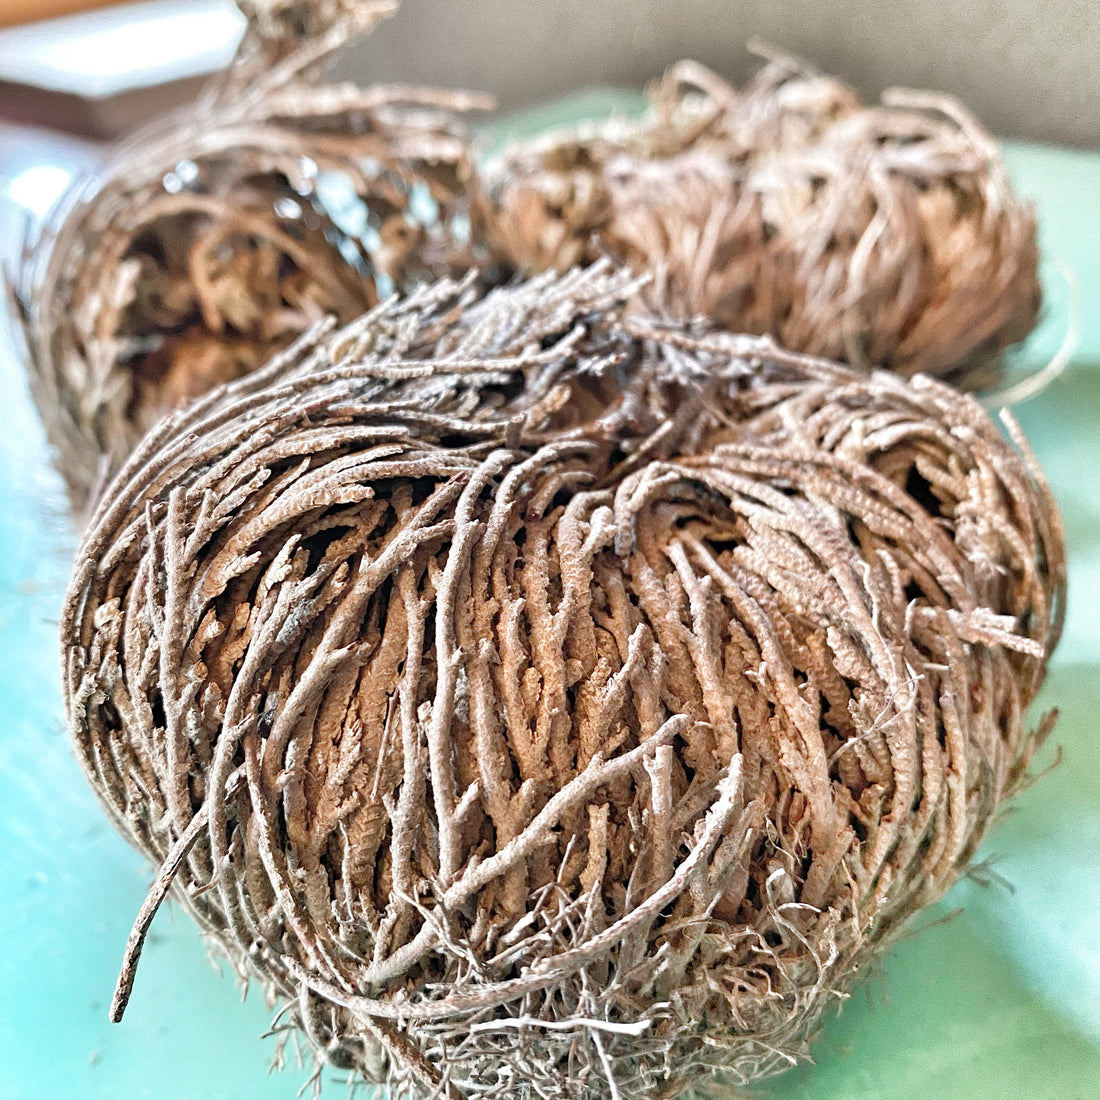 The intricate, dried tendrils of the Resurrection Plant, also known as the Rose of Jericho, positioned on a teal surface, symbolizing the plant&